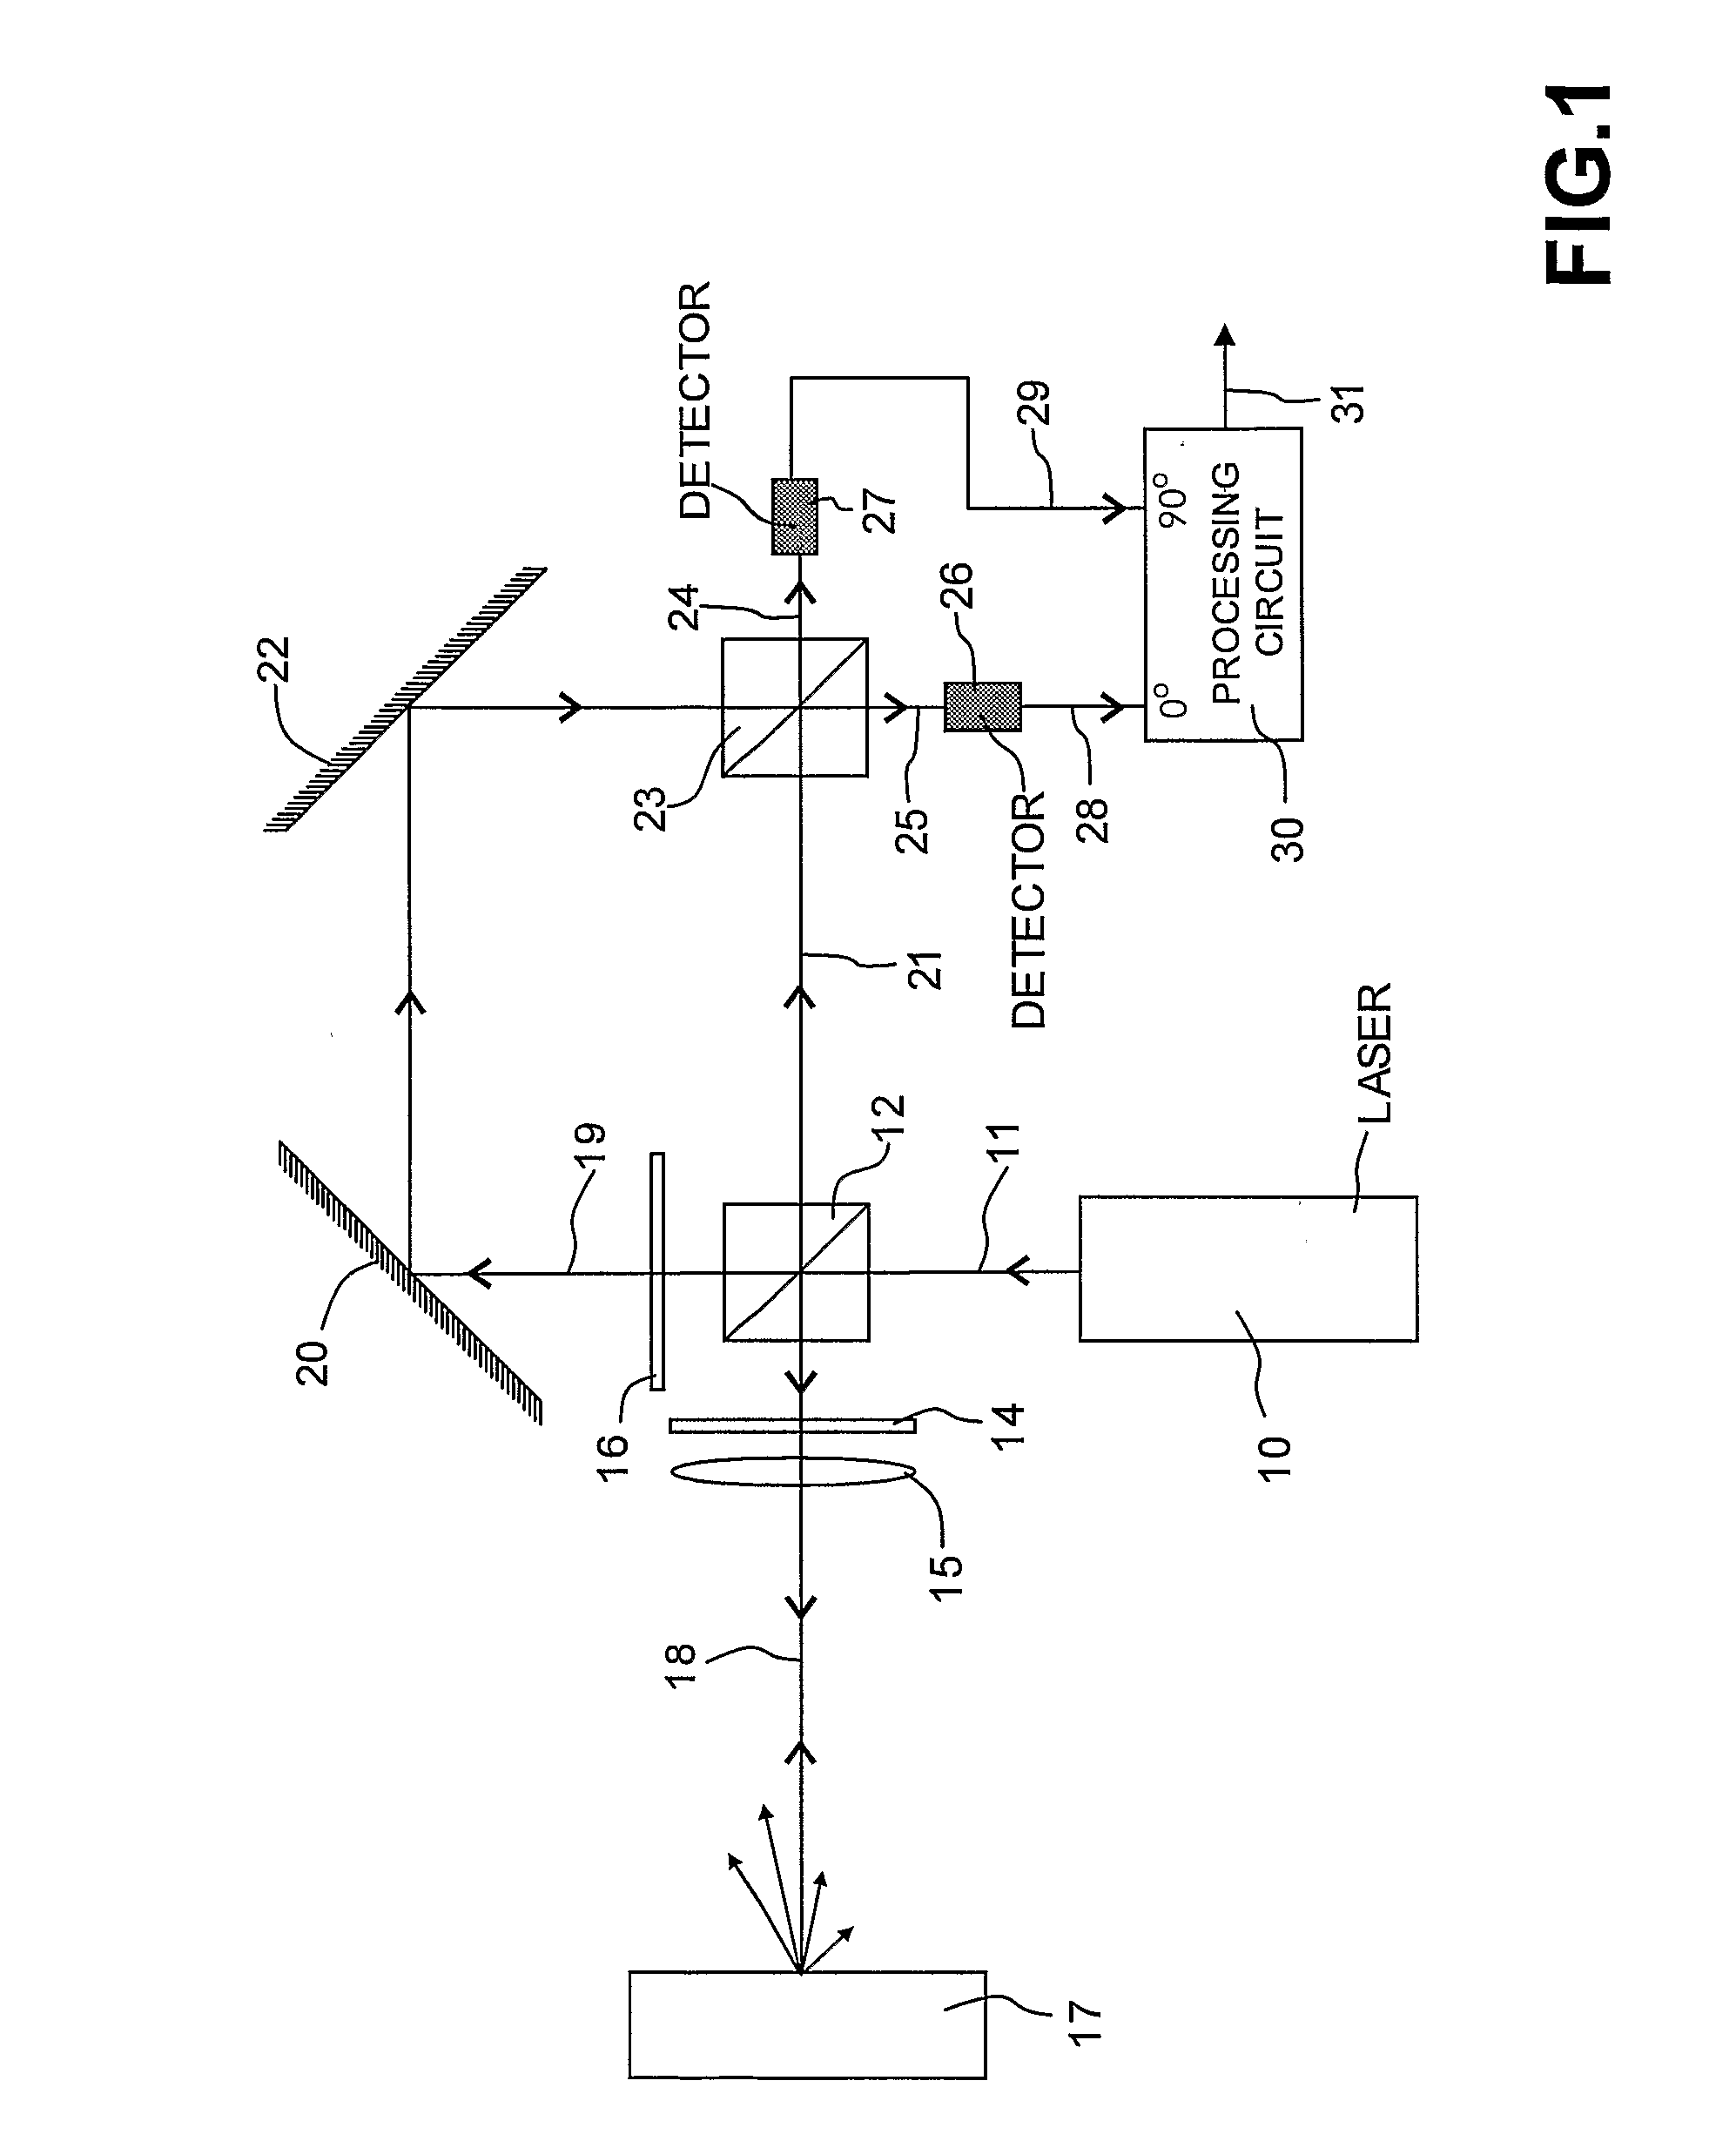 Multi-channel laser interferometric method and apparatus for detection of ultrasonic motion from a surface